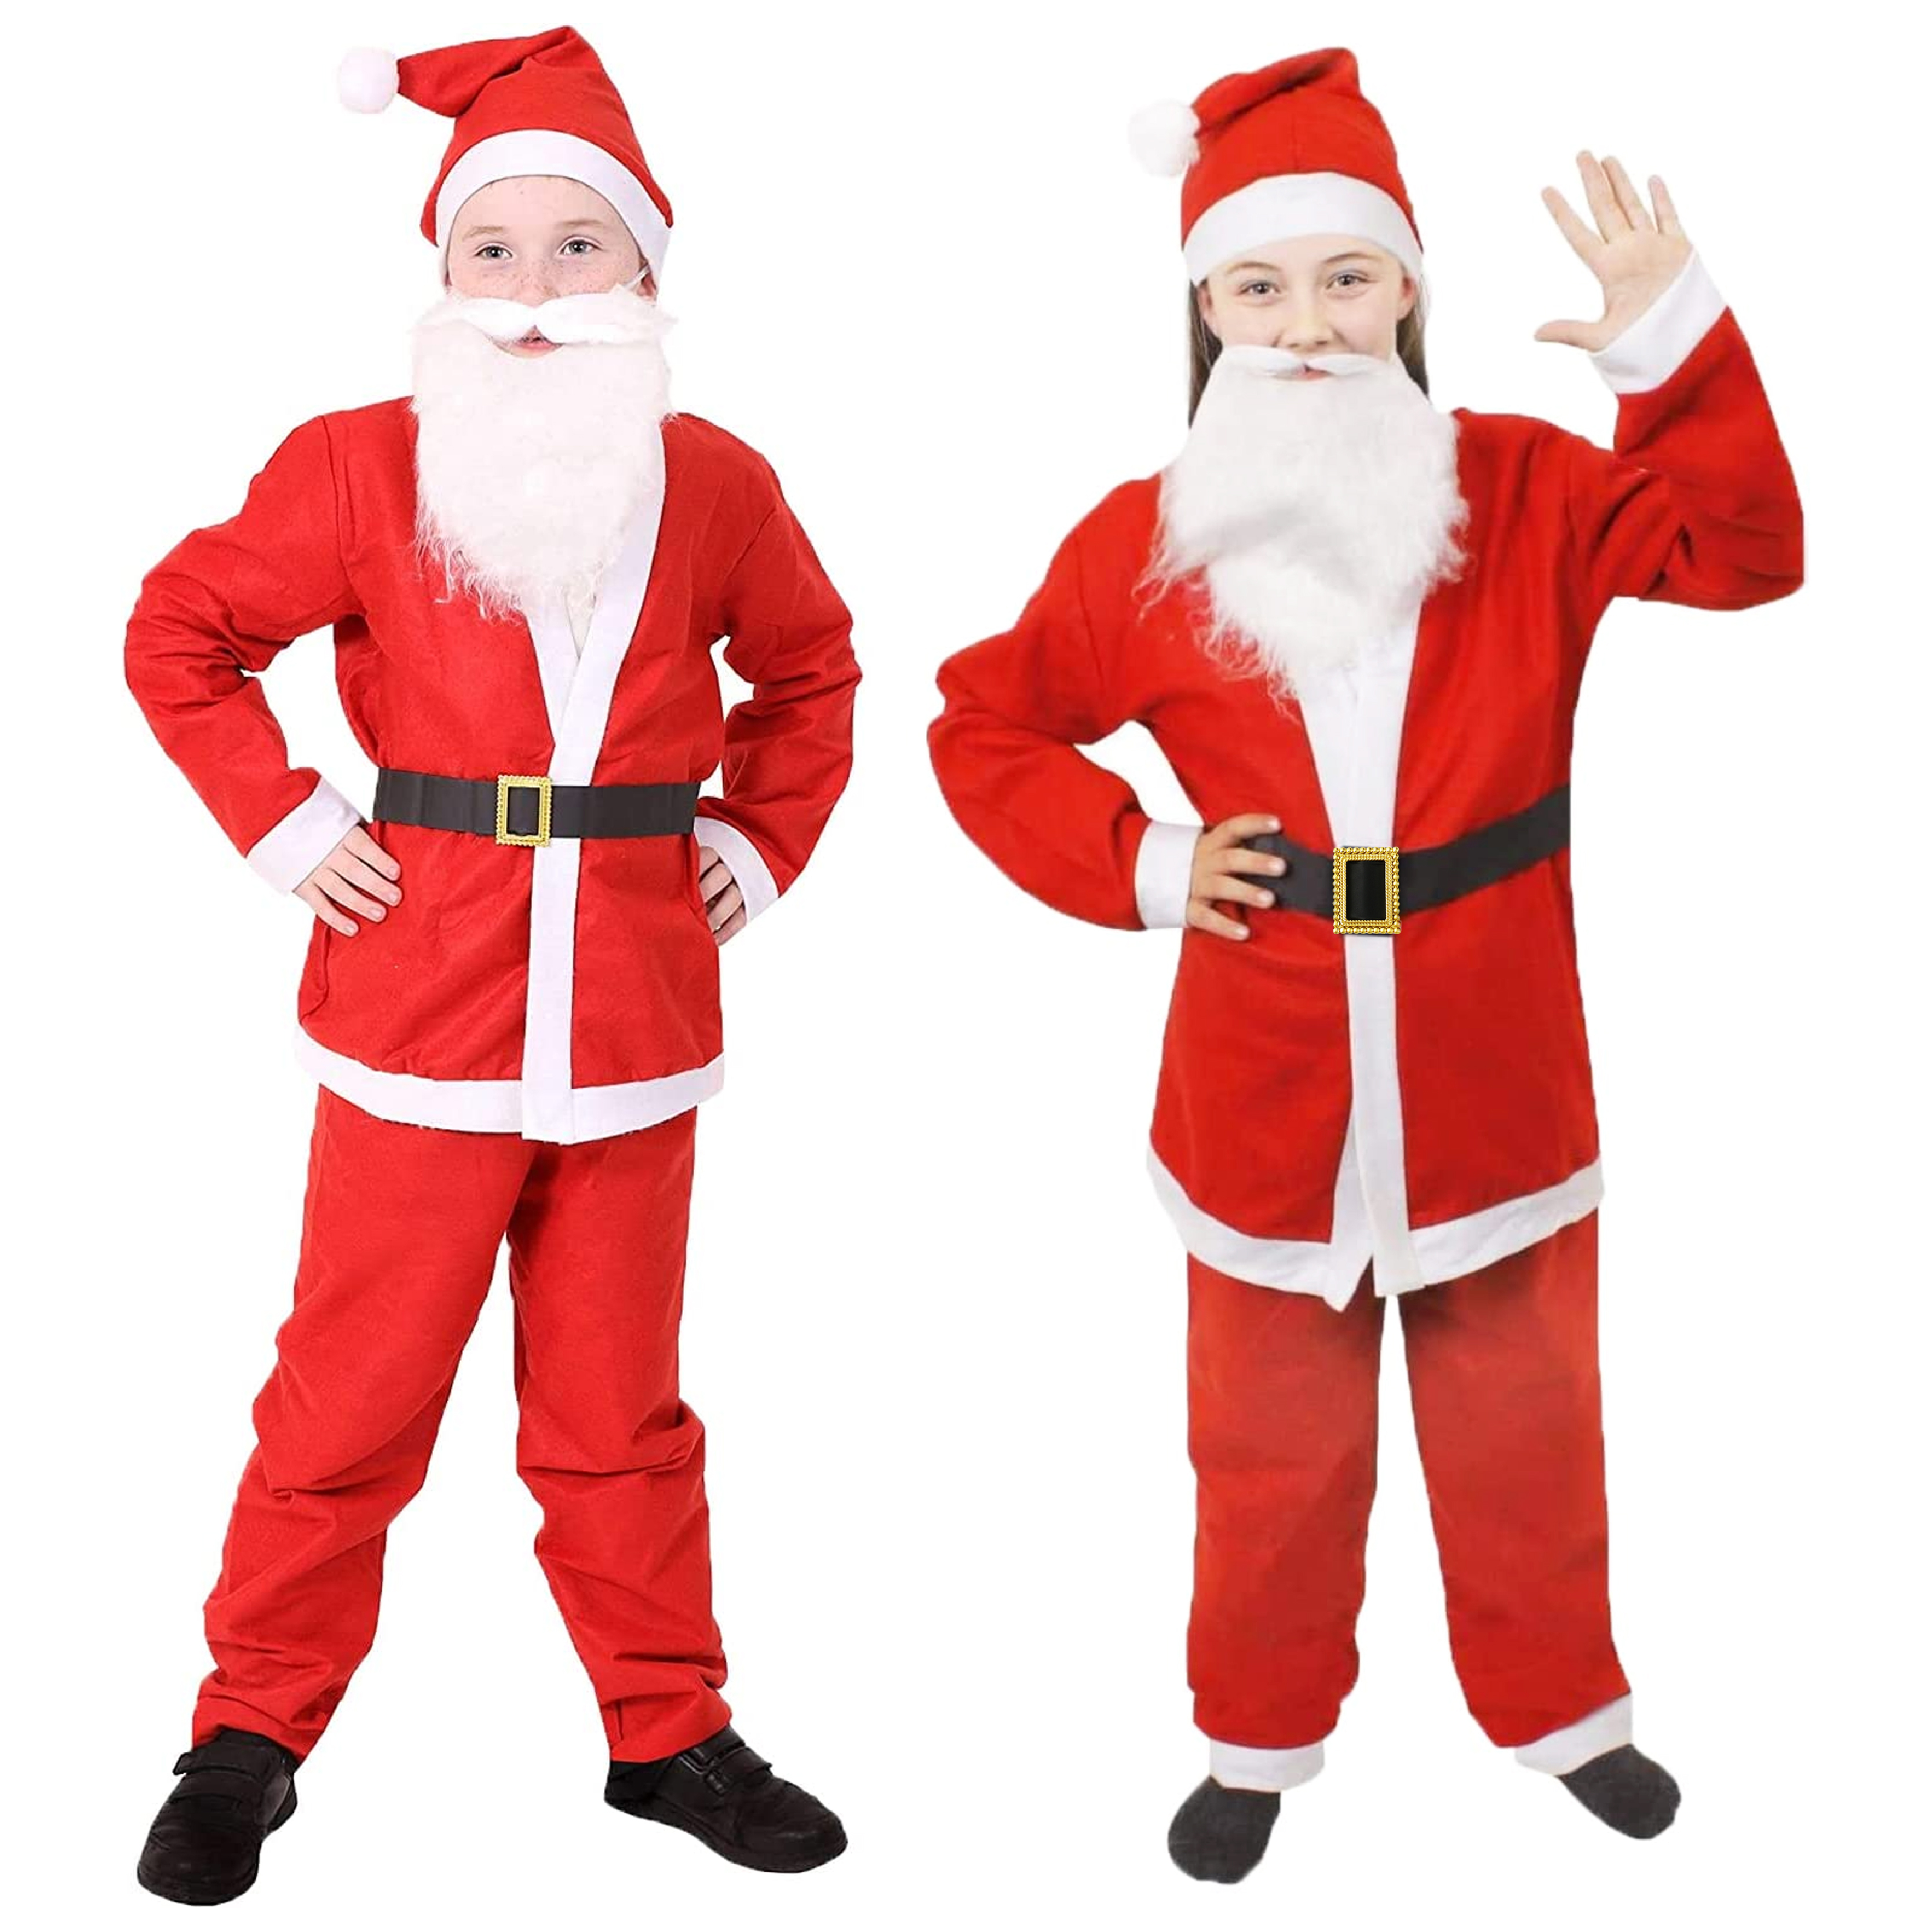 Buy Santa Suit Santa Claus Costume Christmas Suit Adult Costume 16pieces  Burgundy, Wine Red, Large/X-Large Online at Low Prices in India - Amazon.in